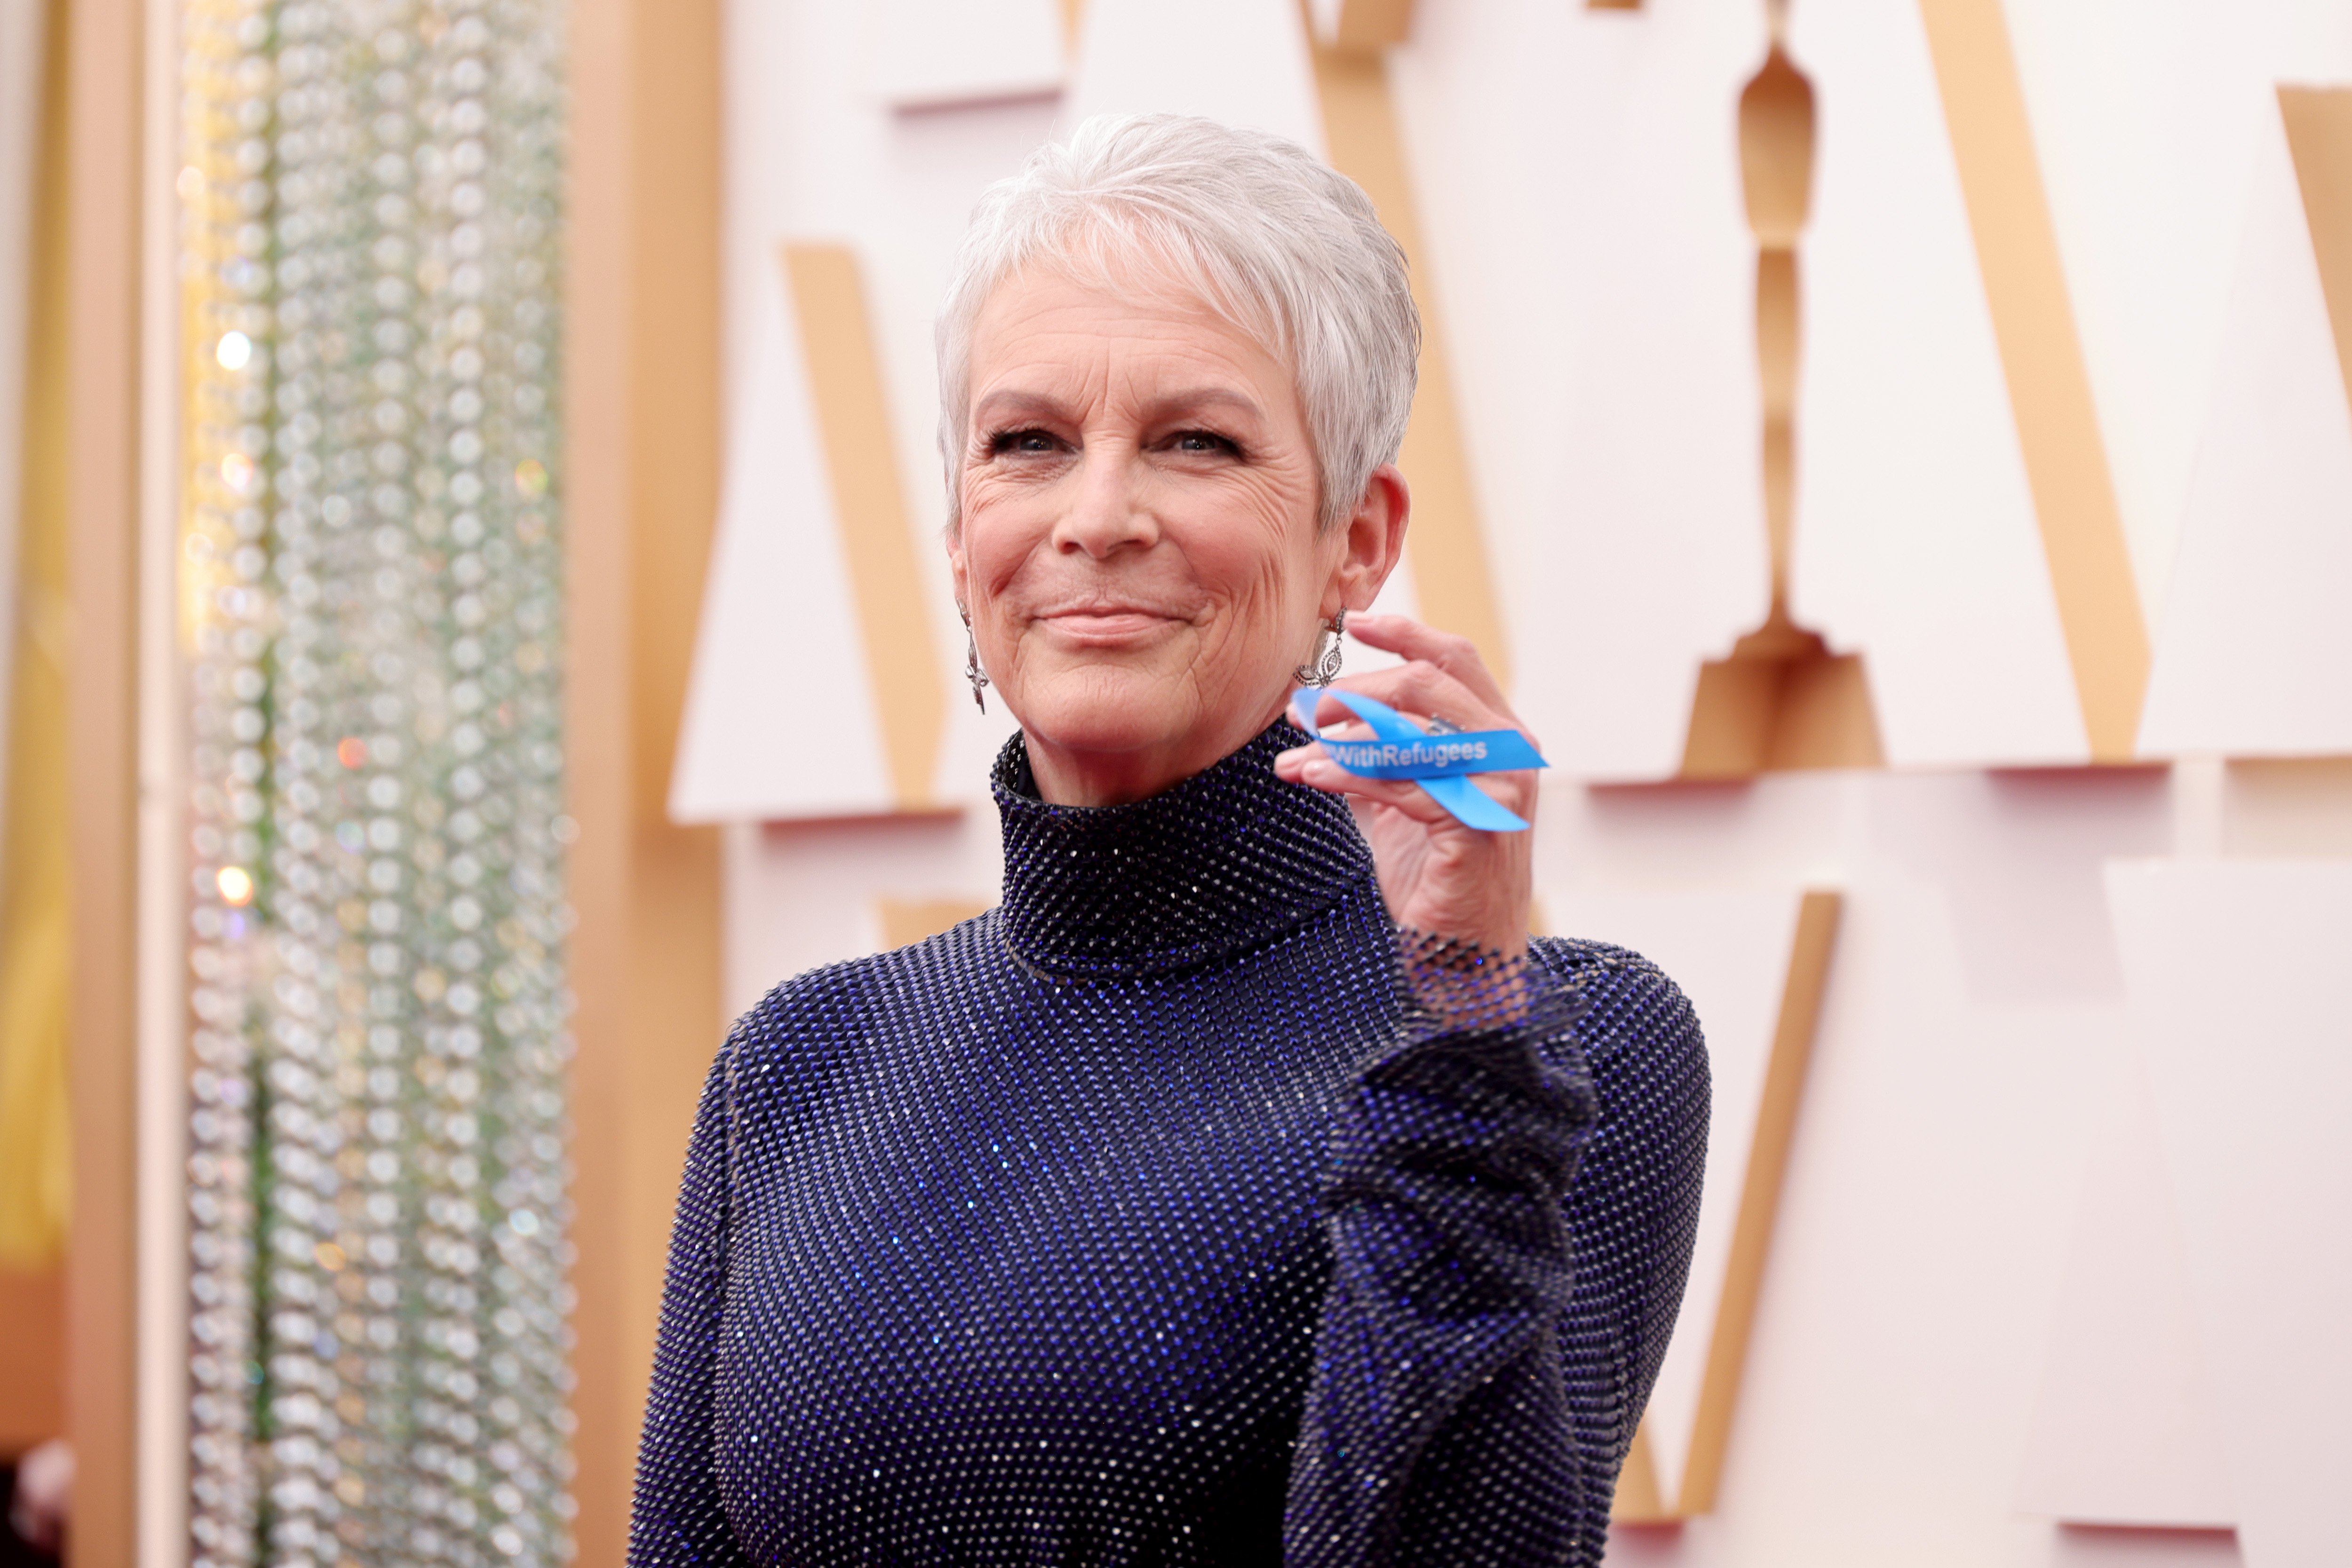 Jamie Lee Curtis attends the 94th Annual Academy Awards at Hollywood and Highland on March 27, 2022 in Hollywood, California. | Source: Getty Images